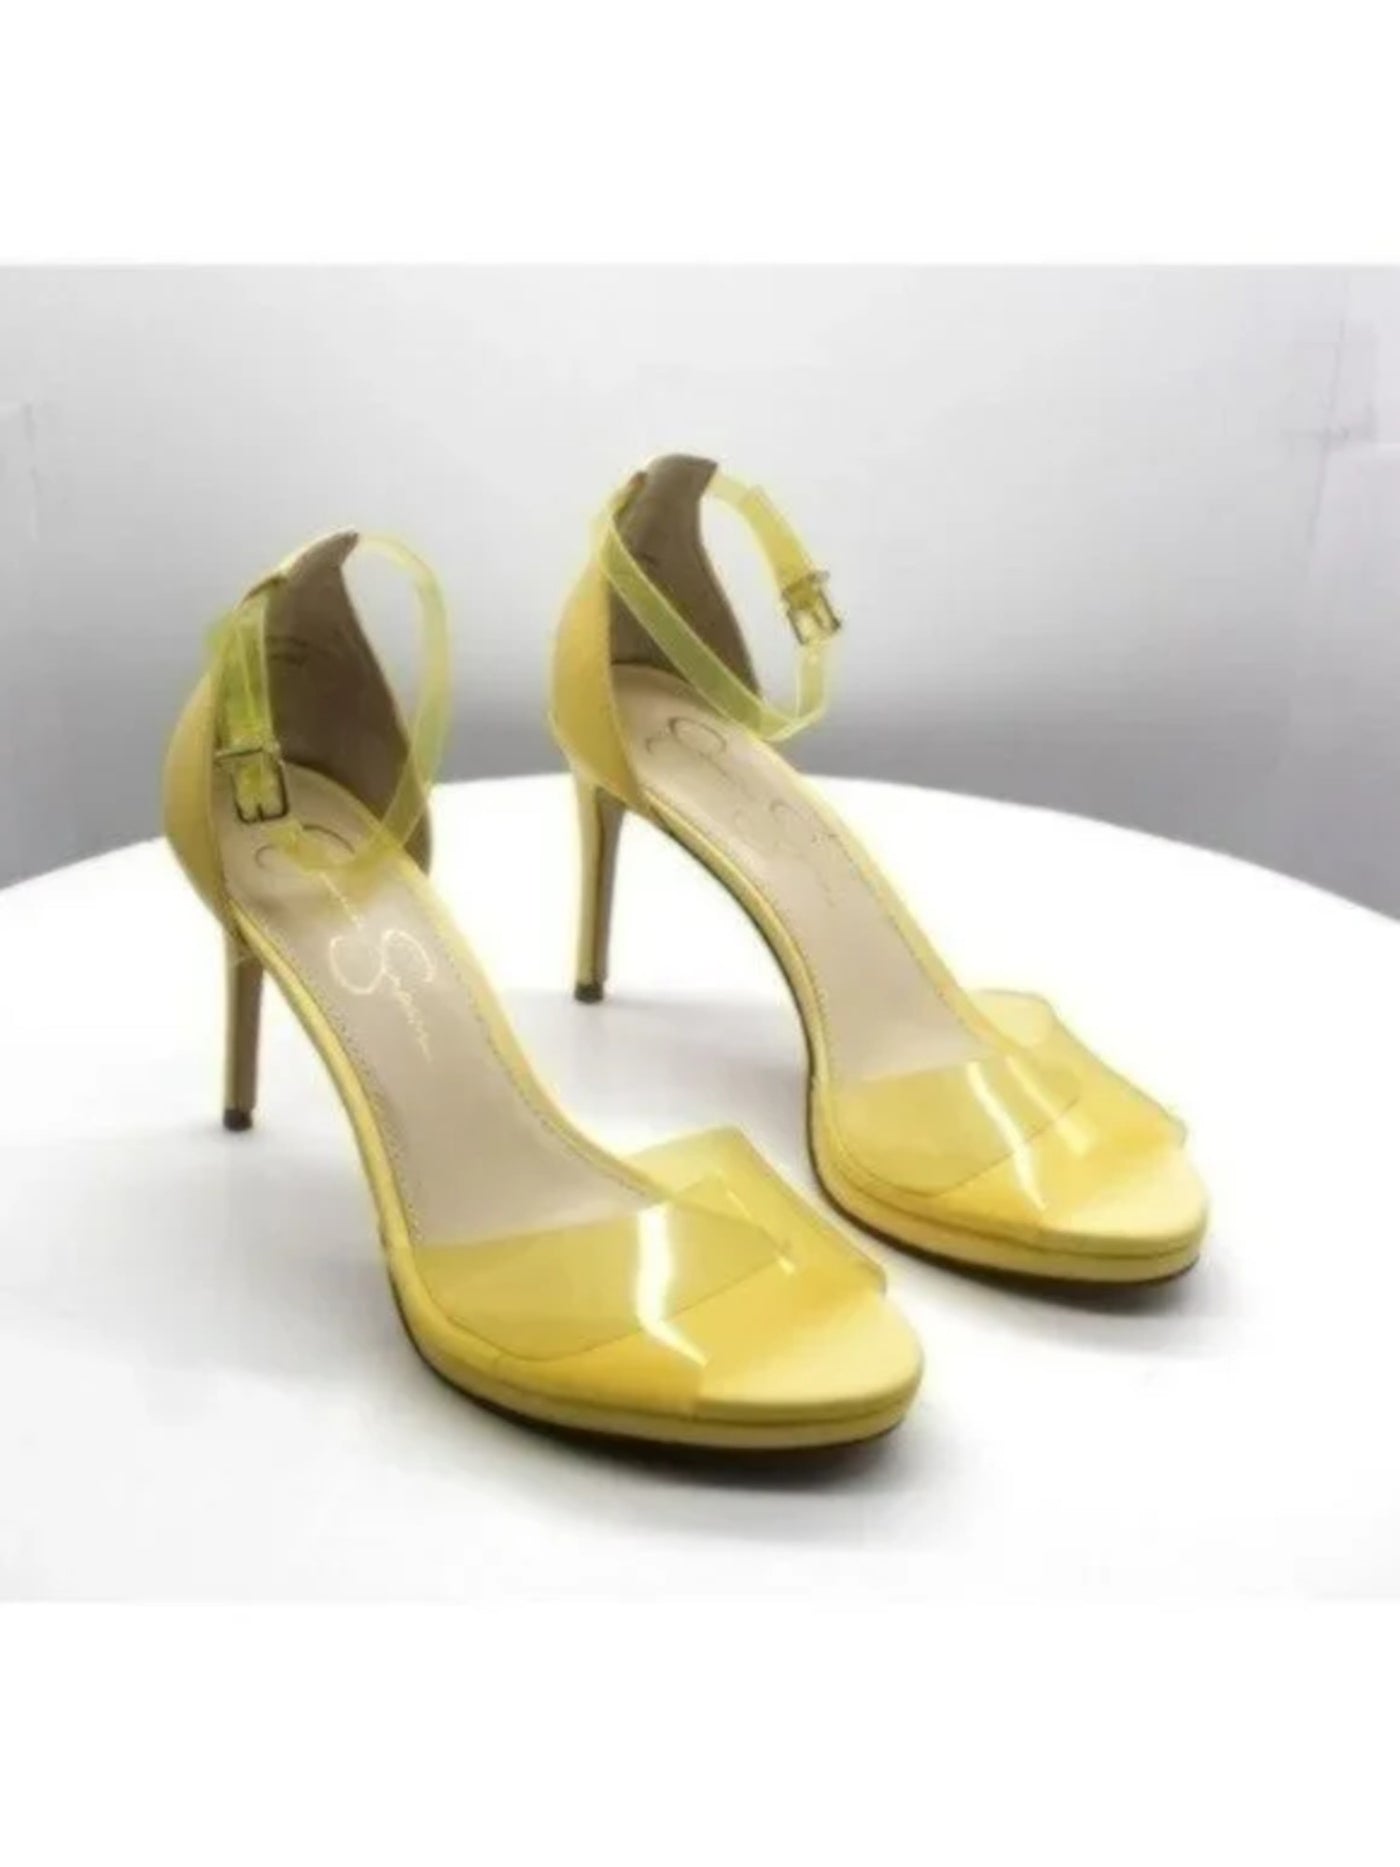 JESSICA SIMPSON Womens Yellow Translucent Ankle Strap Padded Daisile Round Toe Stiletto Buckle Heeled Sandal 7.5 M